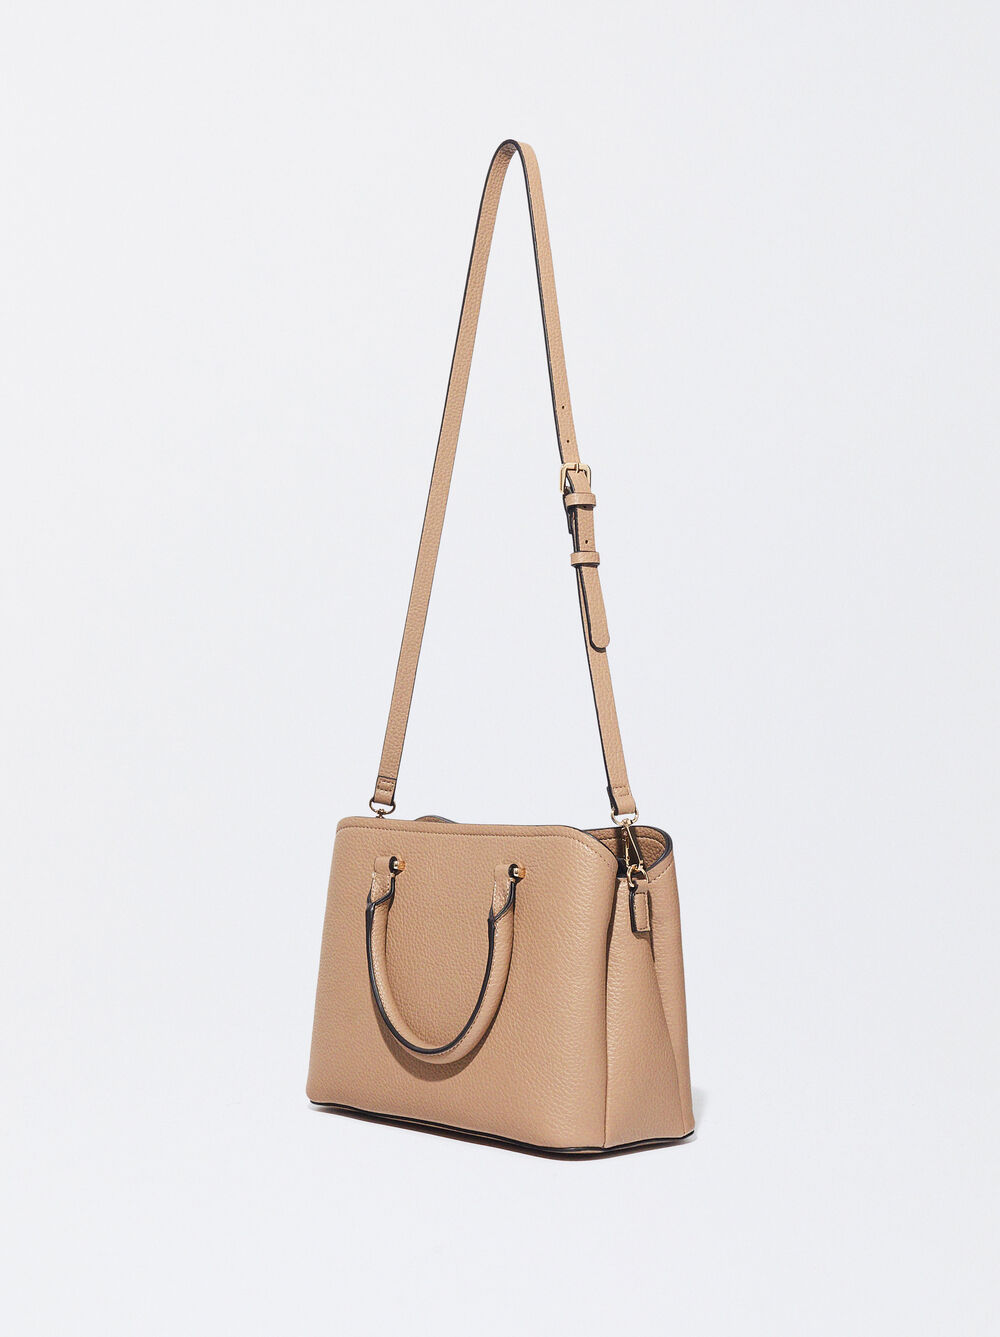 Bolso Tote Everyday image number 2.0